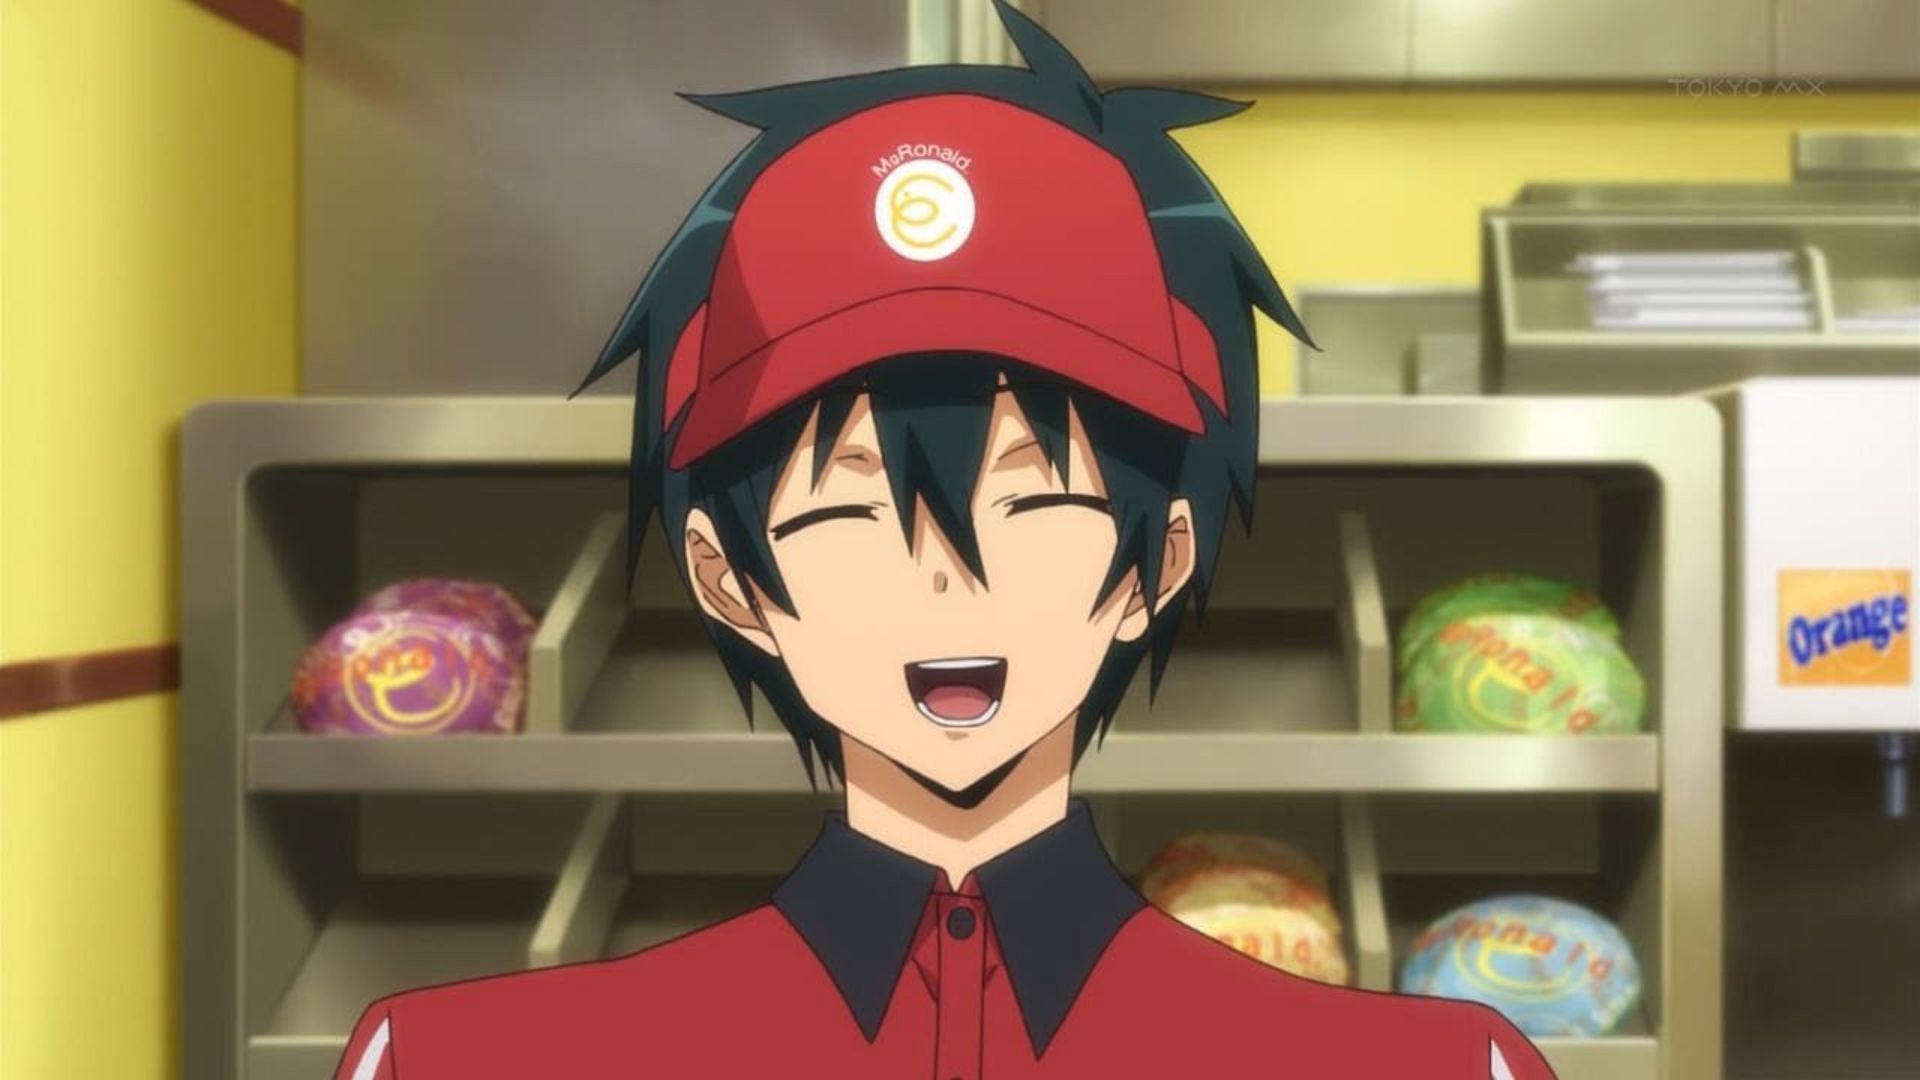 Maou Sadao as seen in The Devil is a Part-Timer (Image via White Fox)